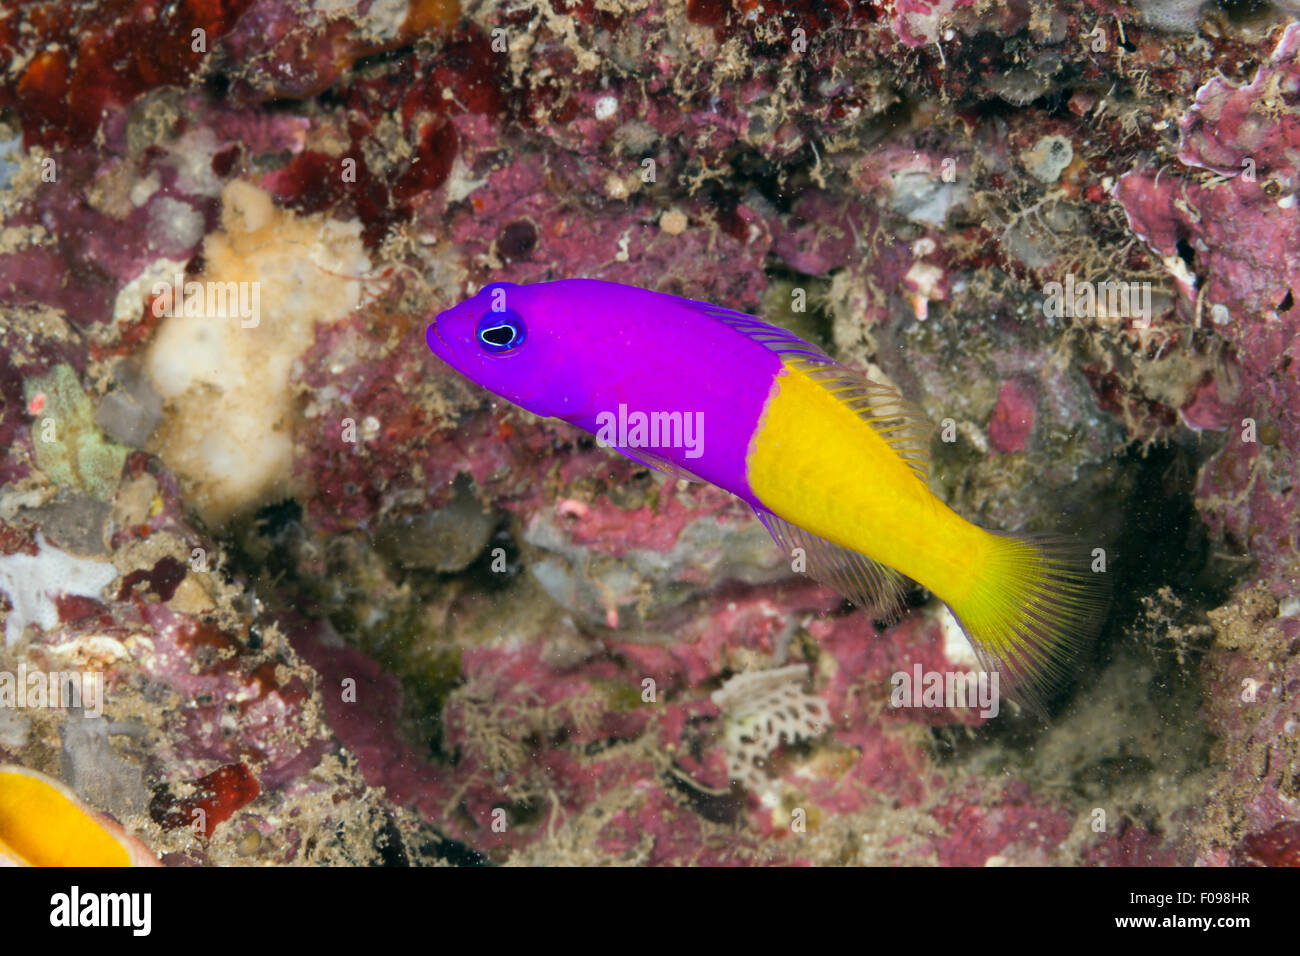 Royal Dottyback, Pseudochromis paccagnellae, Marovo Lagoon, Solomon Islands Stock Photo